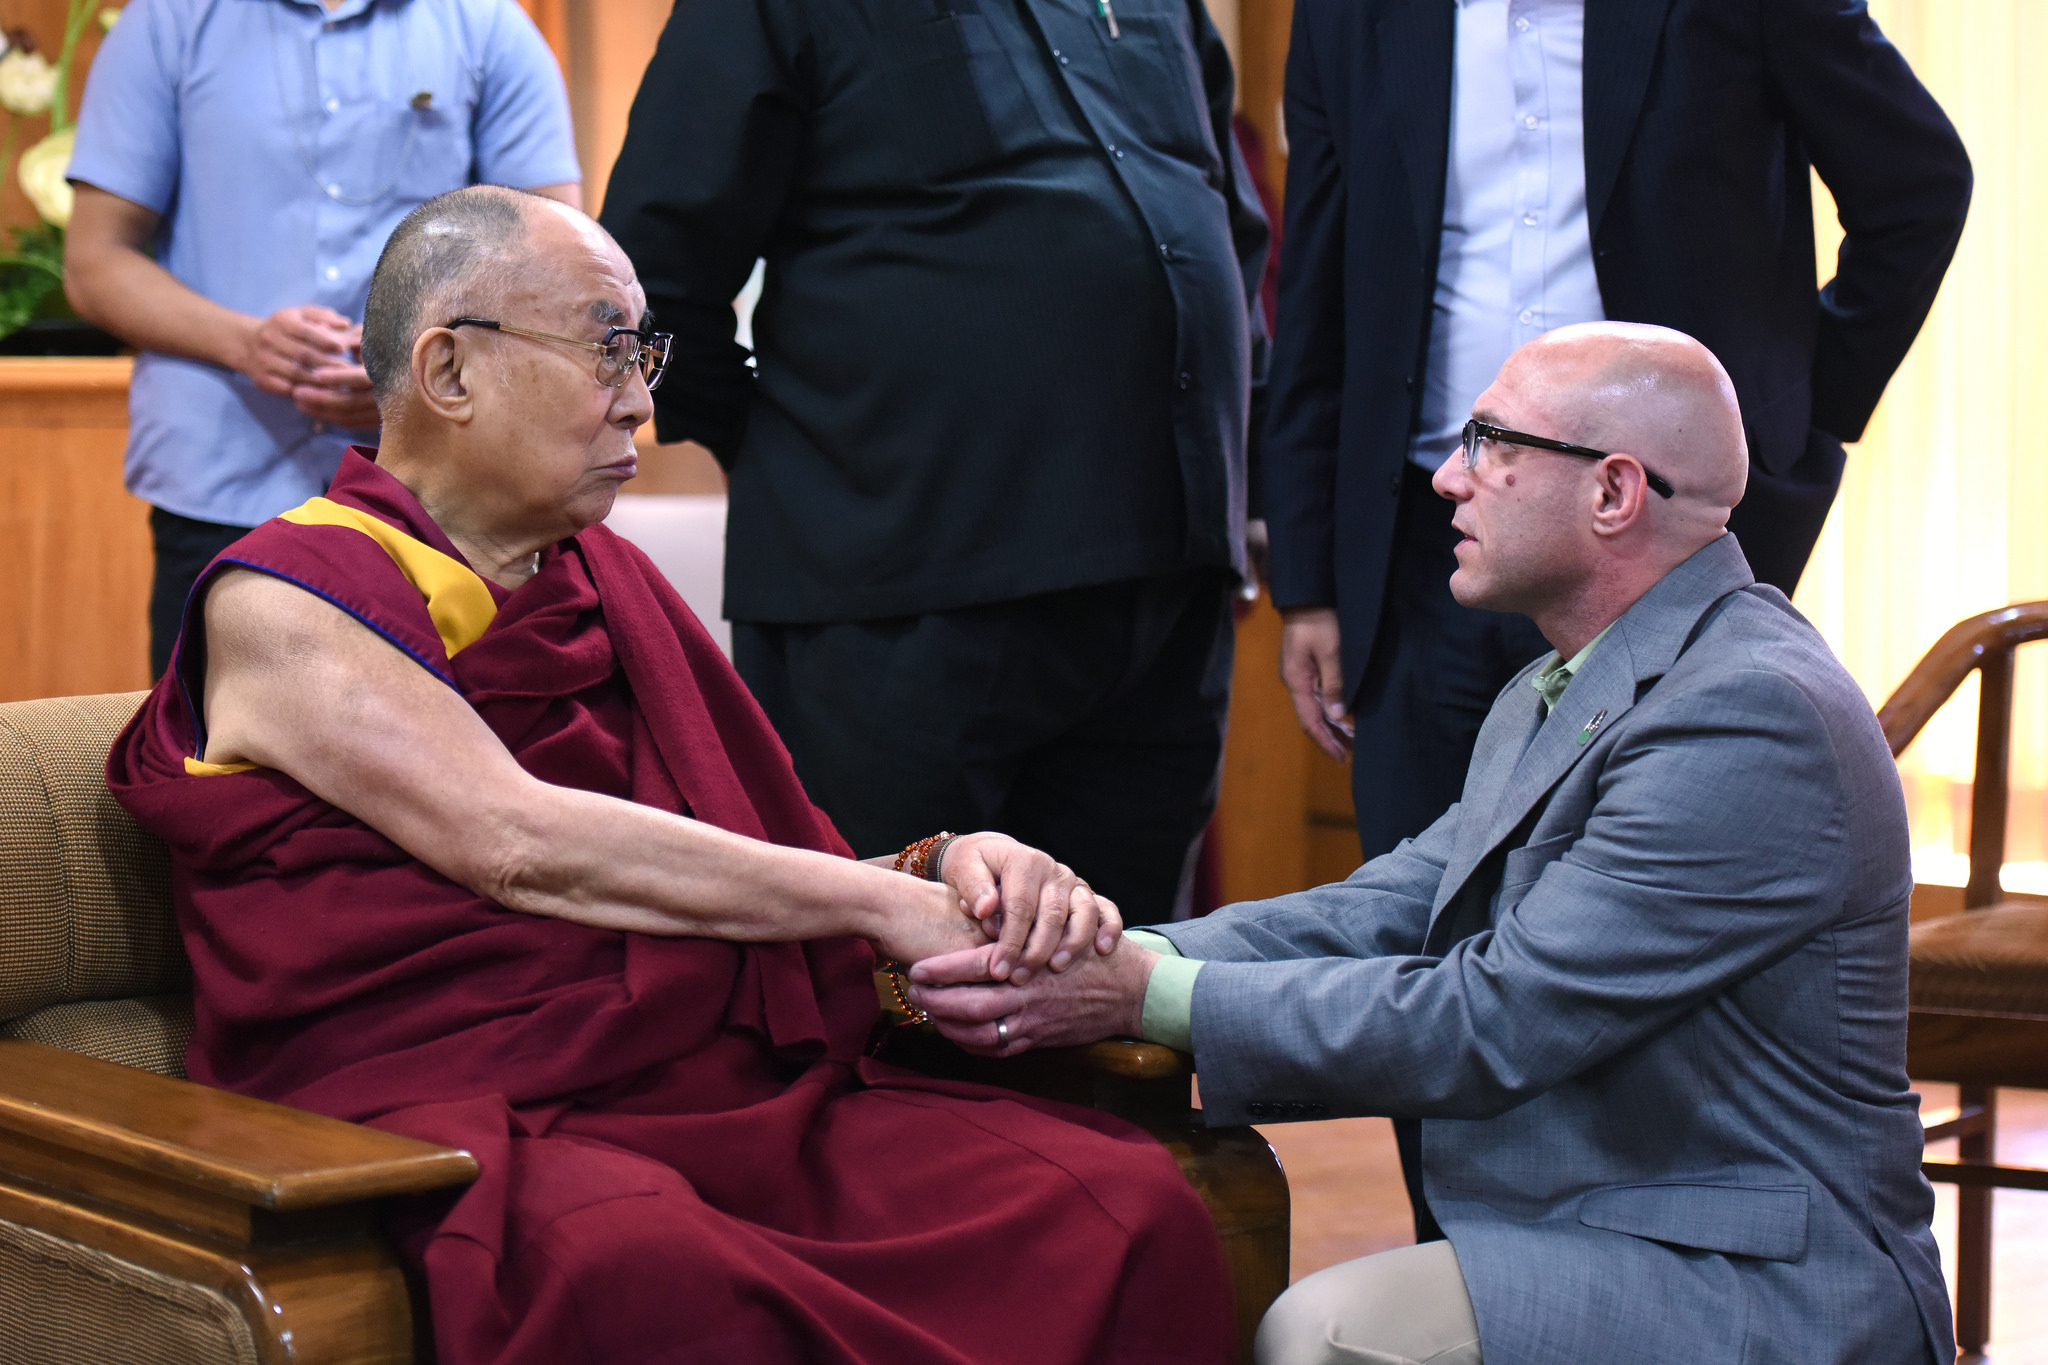 His Holiness the Dalai Lama here with Jeremy Richman, co-founder of the Avielle Foundation